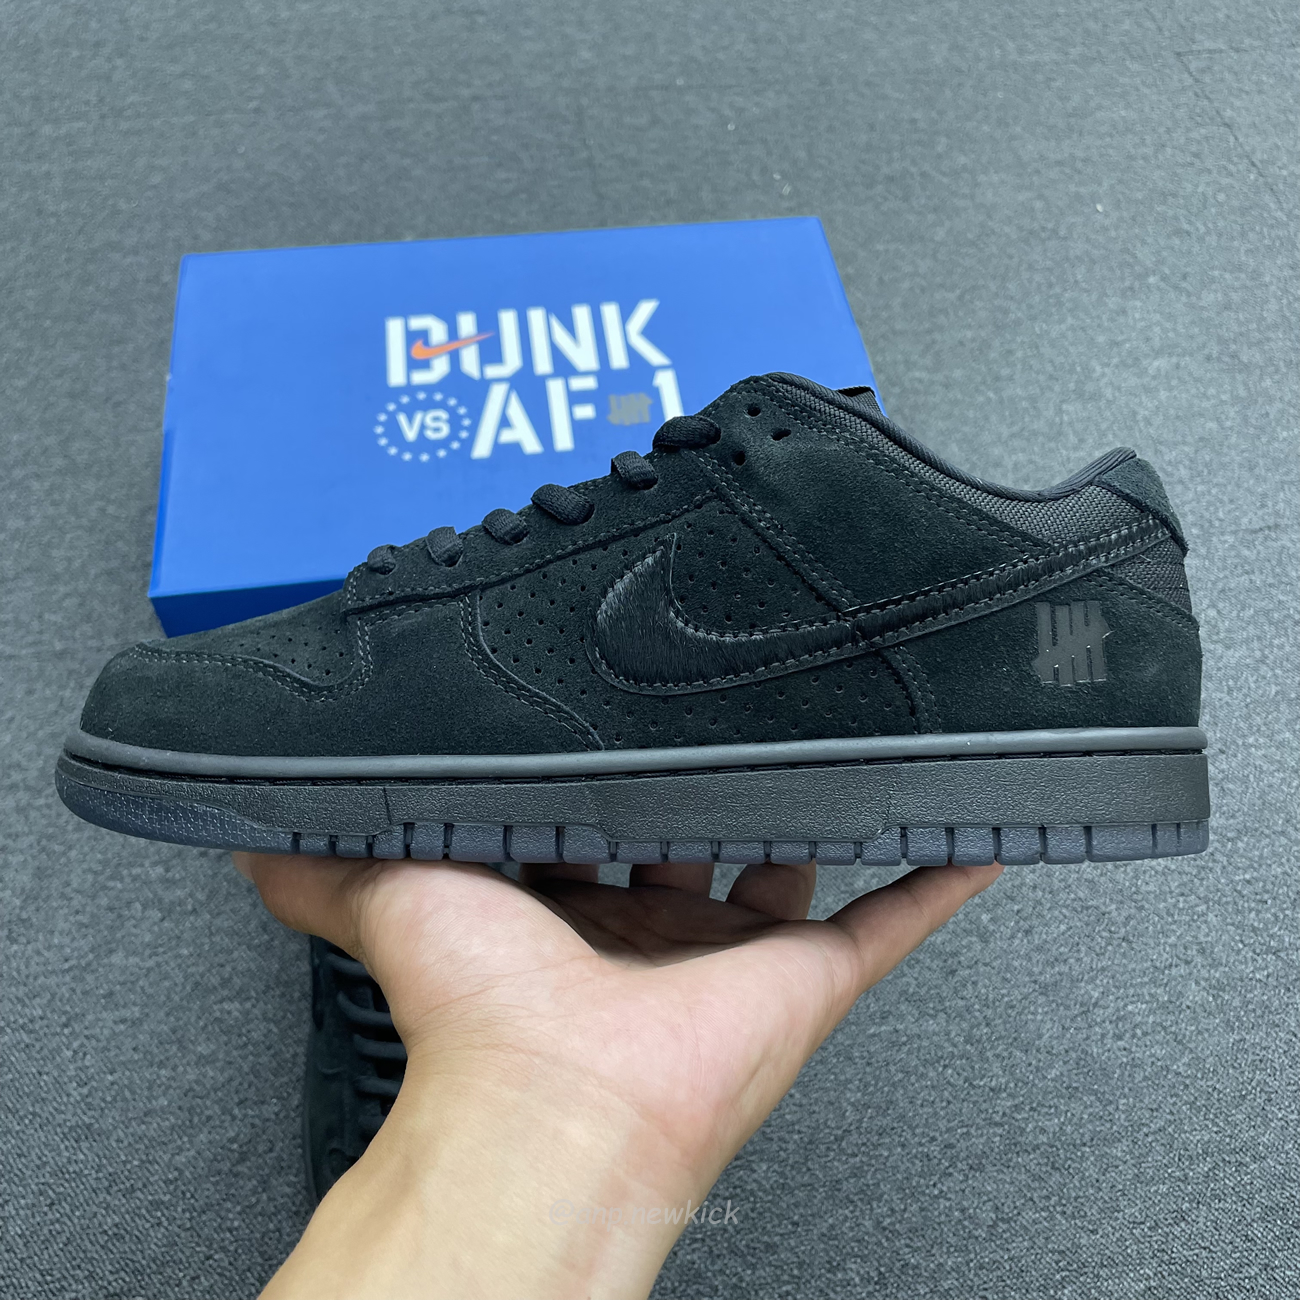 Nike Dunk Low Sp Undefeated 5 On It Black Do9329 001 (9) - newkick.org